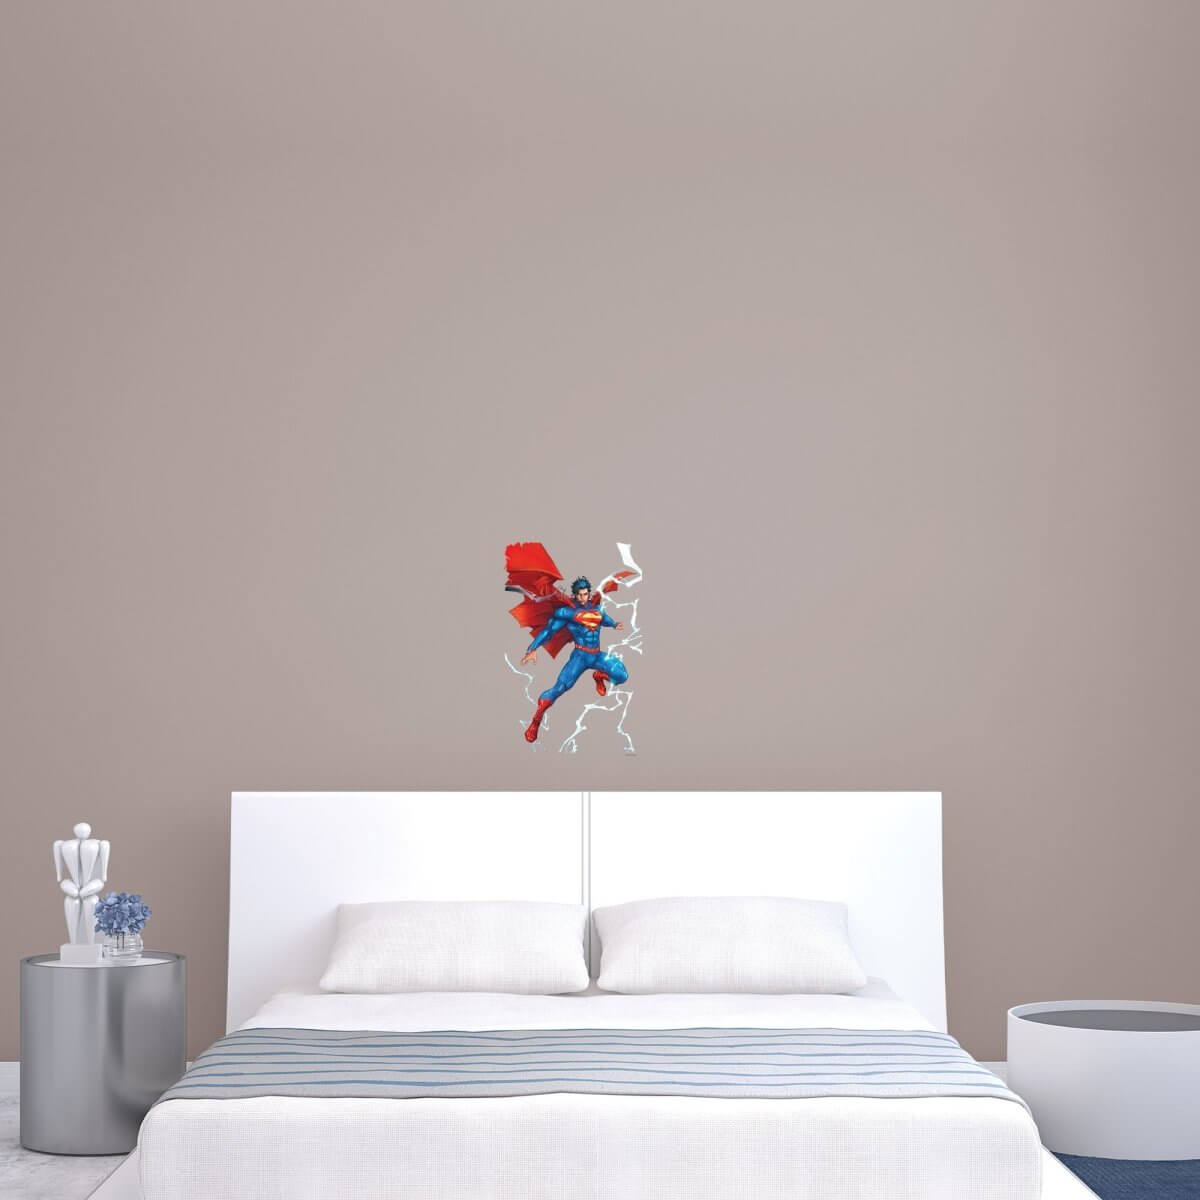 Kismet Decals New 52 Superman Annual #1 Comic Cover Series Licensed Wall Sticker - Easy DIY Home & Room Decor Wall Art - Kismet Decals